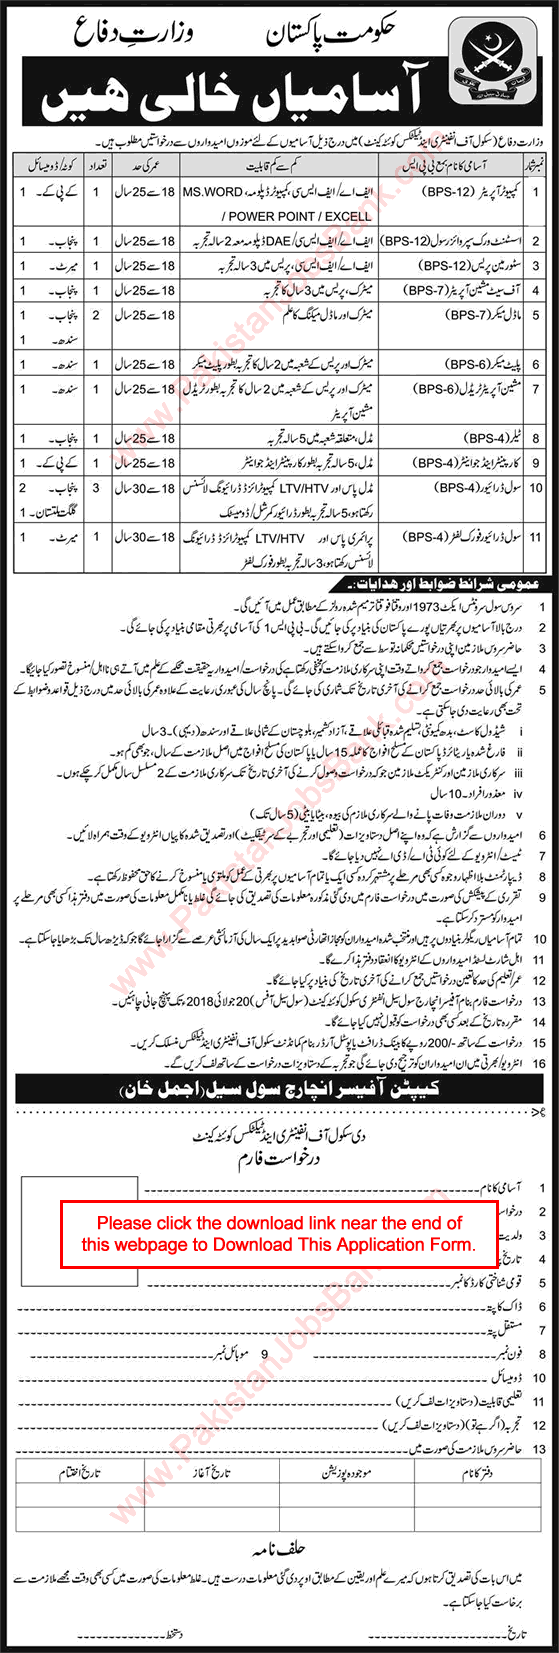 School of Infantry and Tactics Quetta Jobs July 2018 Application Form Ministry of Defence Latest